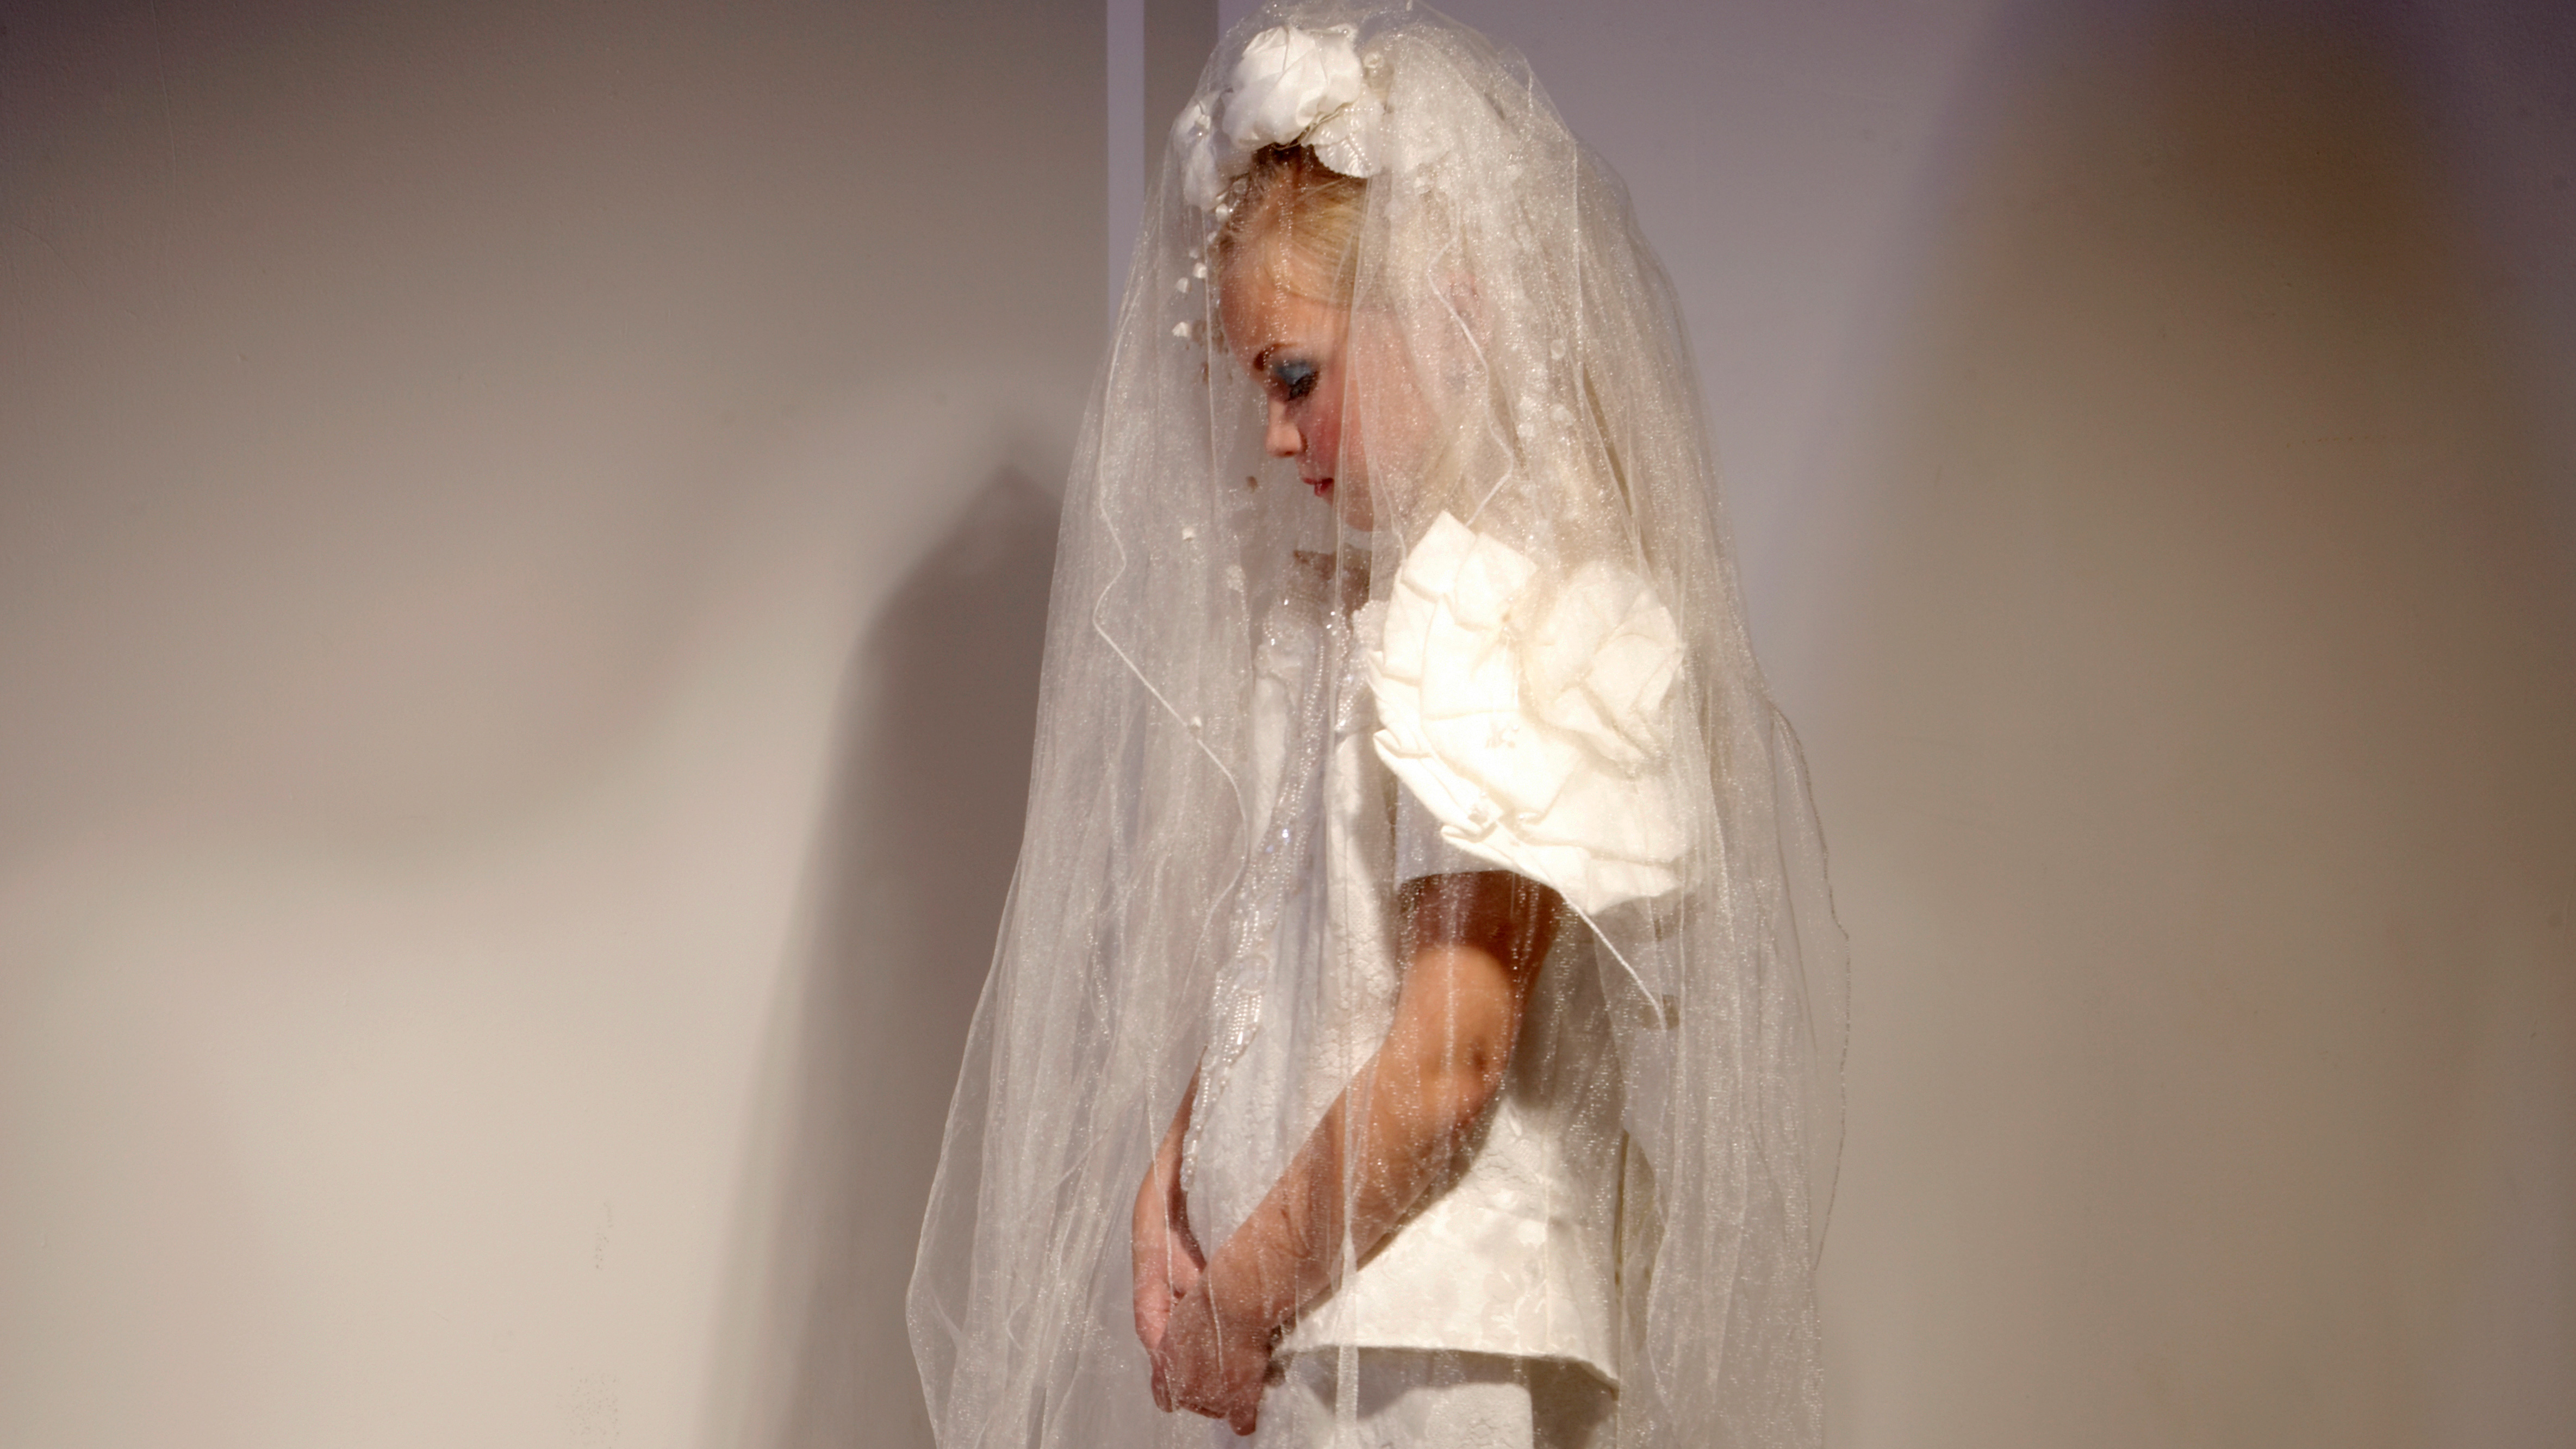 Why Are There Still So Many Child Brides in America?